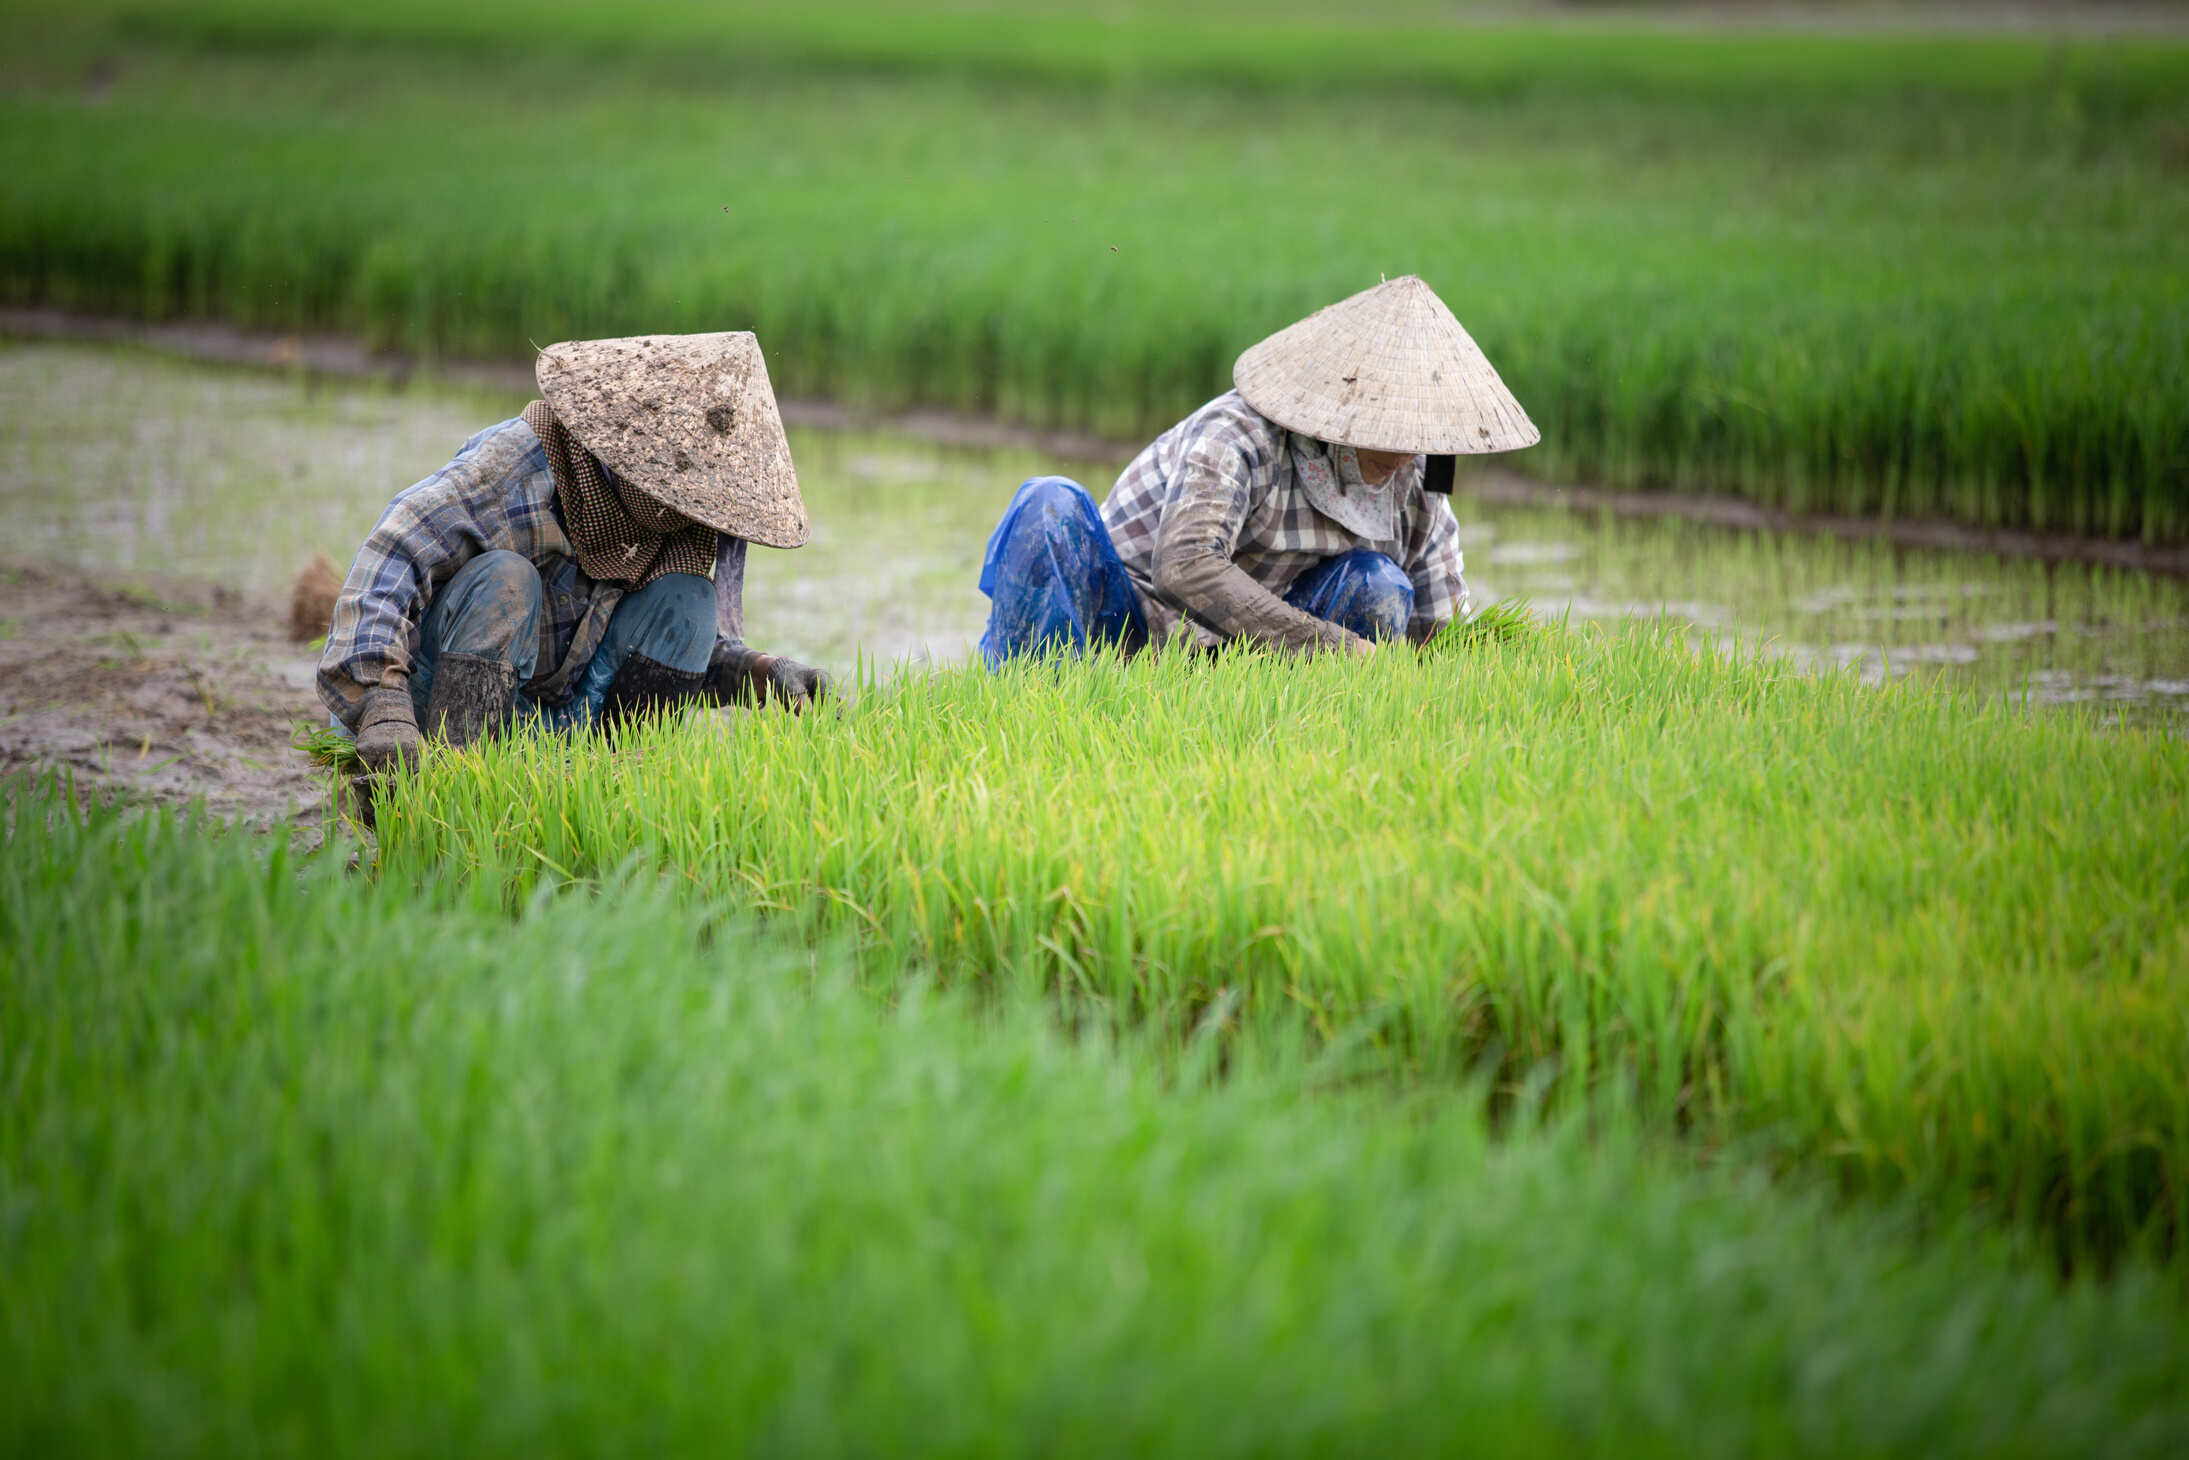 Two Farmers Planting Rice in Paddy Field